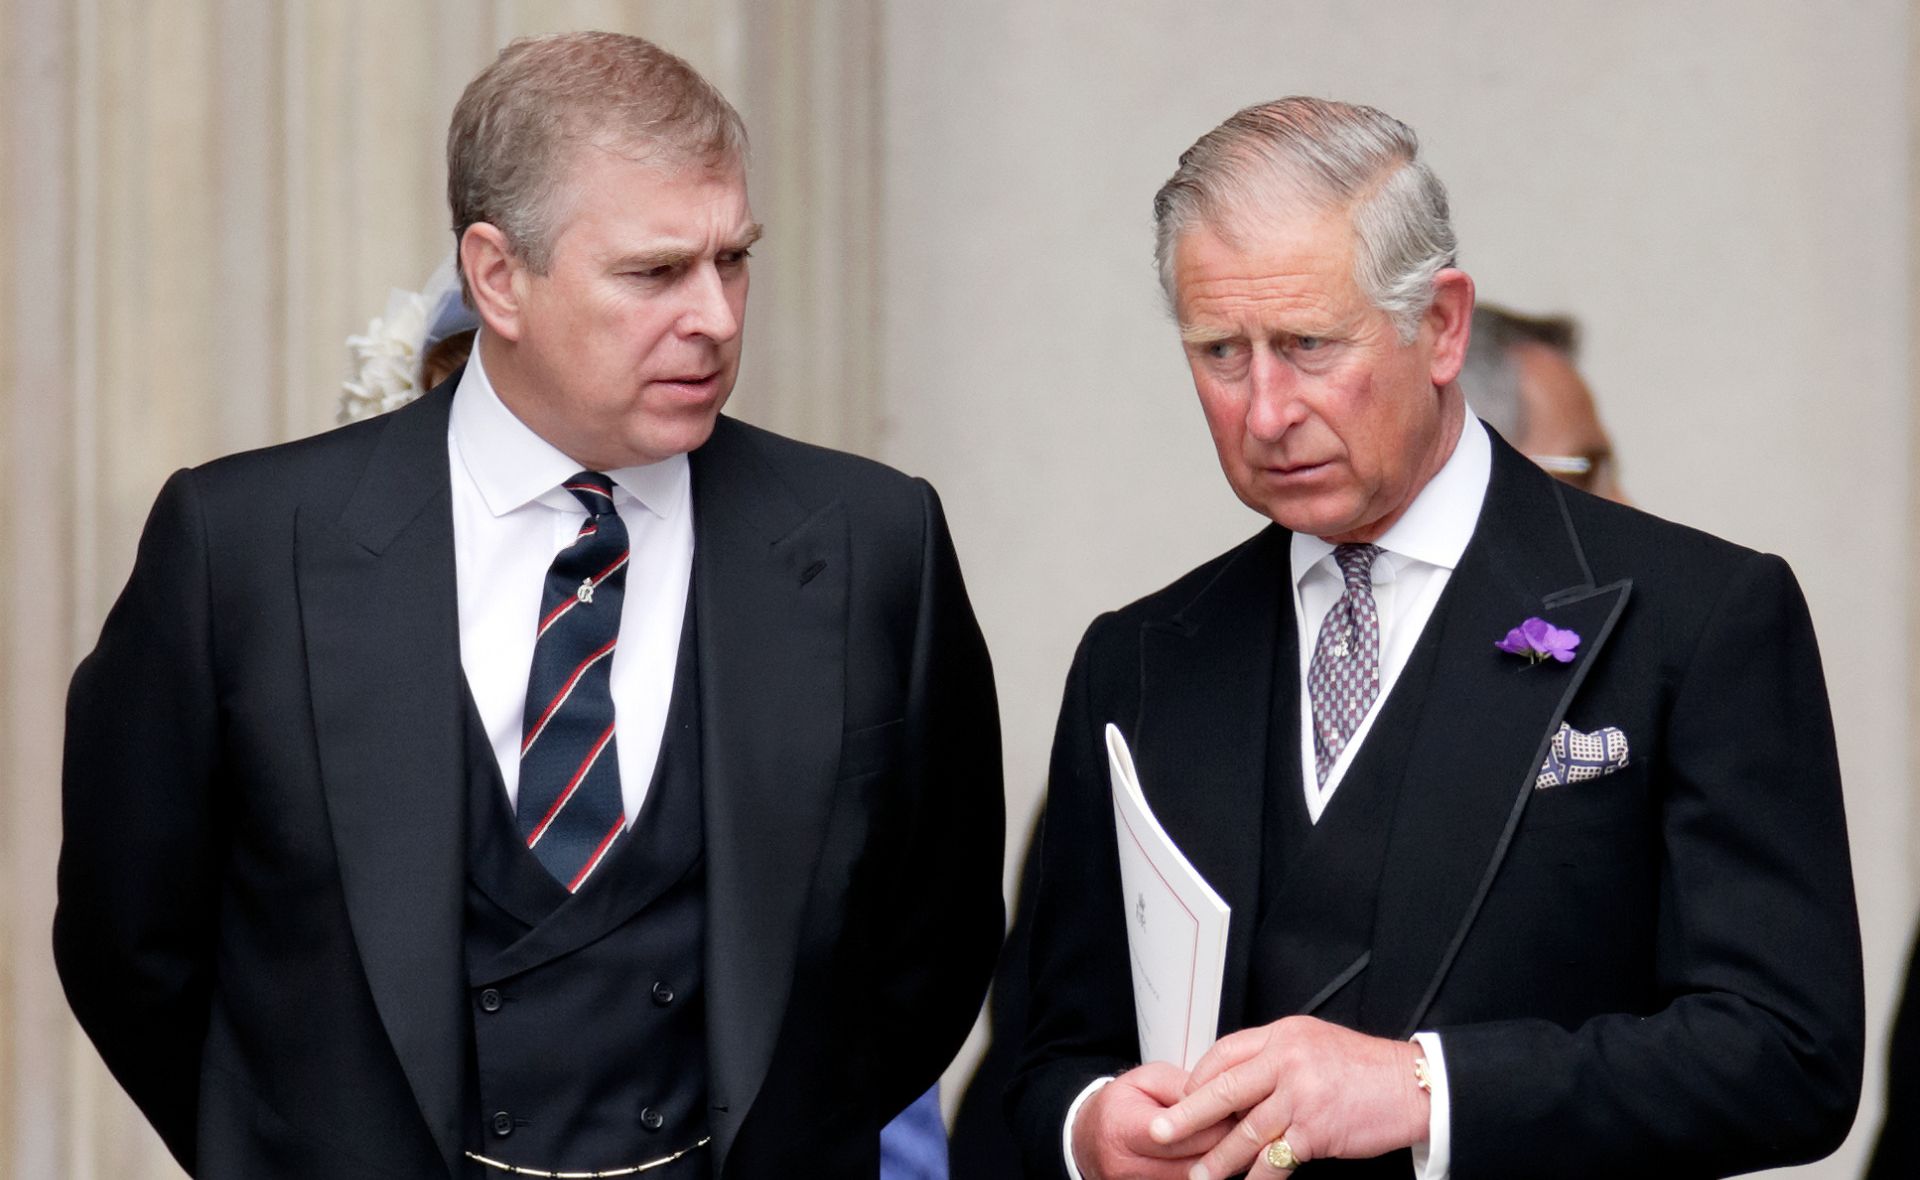 Prince Andrew “blindsided” by his brother King Charles’ decision to refuse him royal duties